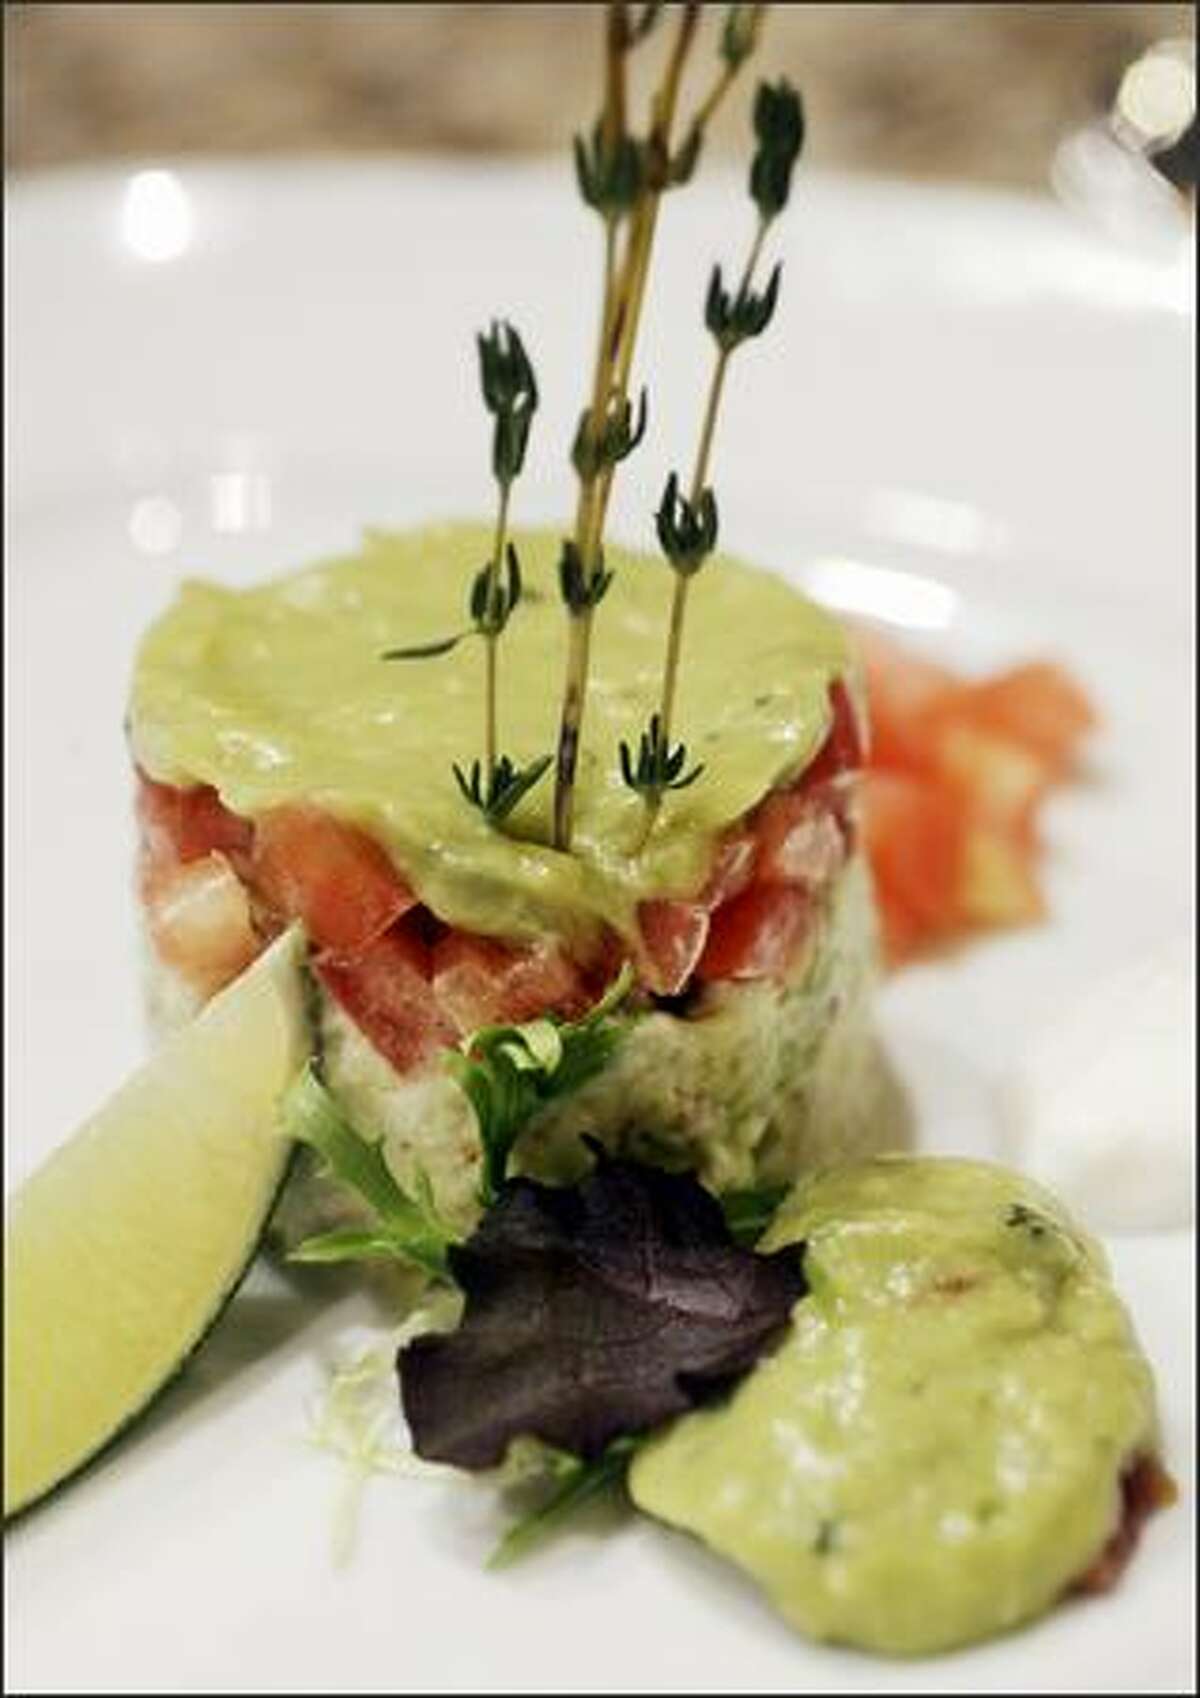 Master chef Rudi Sodamin made this avocado and crab timbale during a demonstration in the new Culinary Arts Center aboard Holland America's ms Amsterdam.